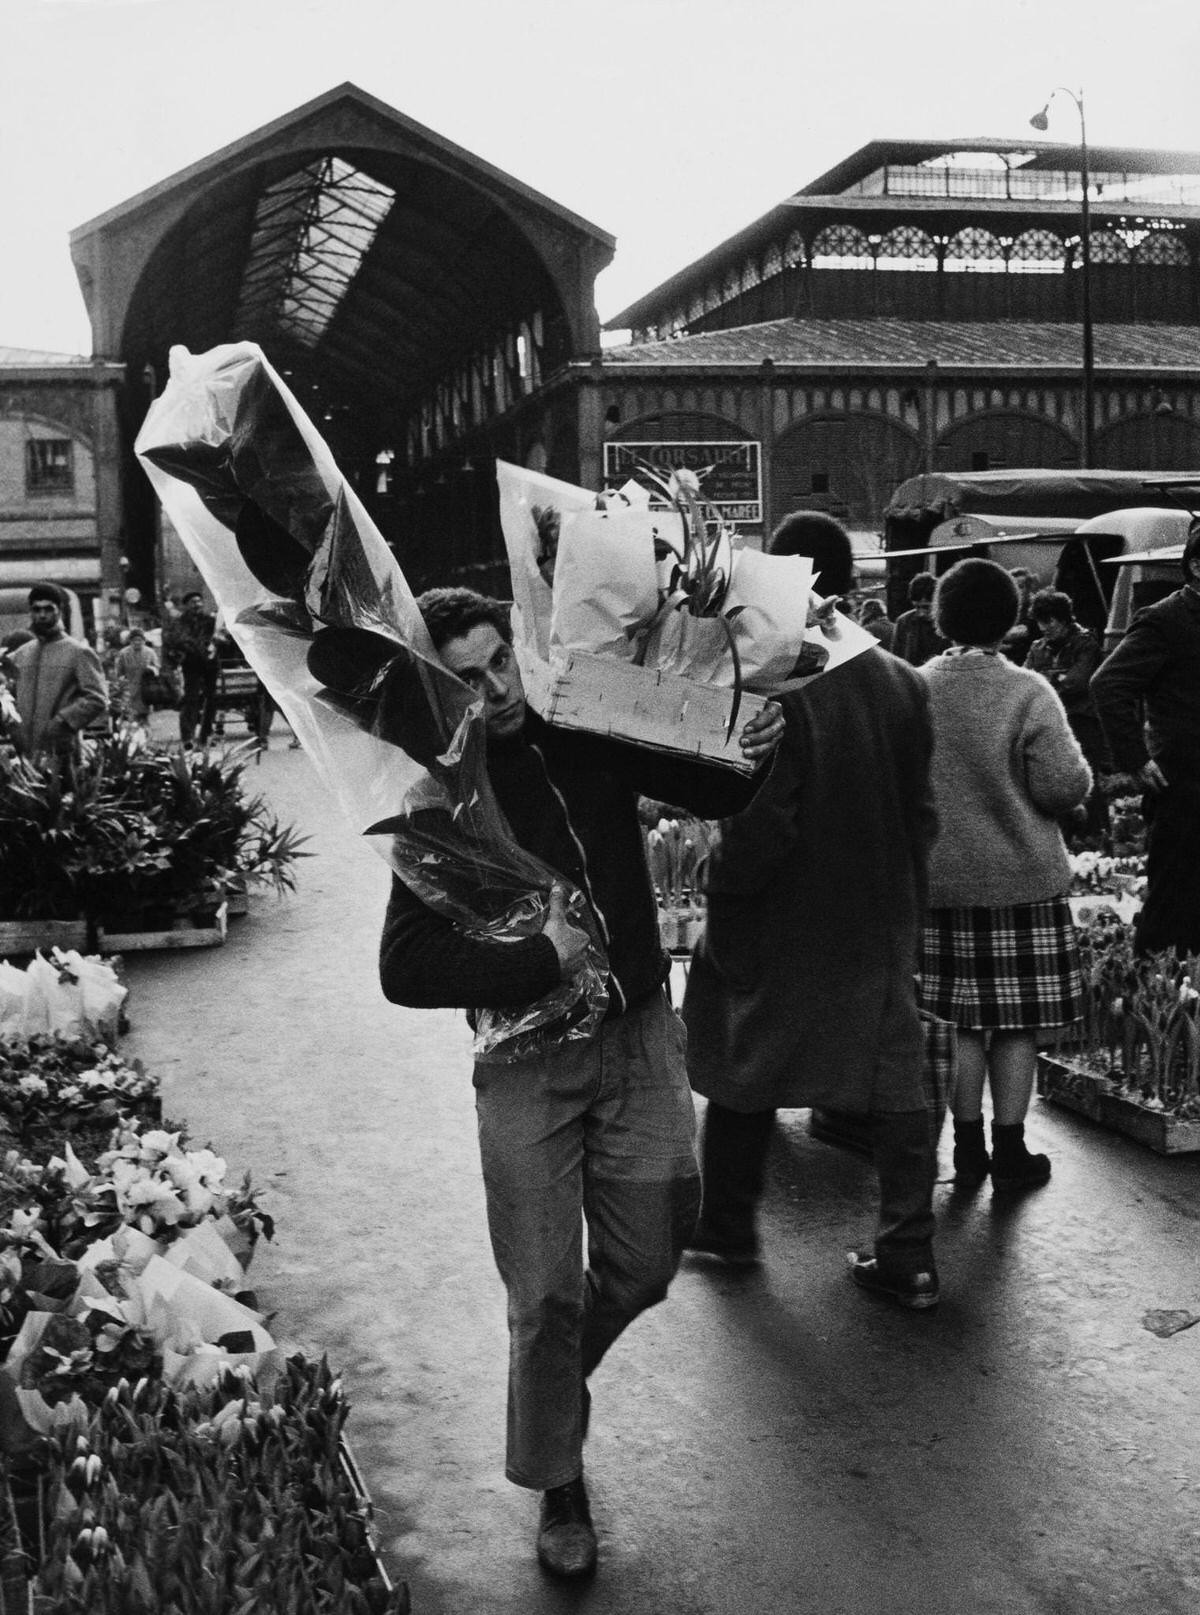 A Man Carrying some bouquets of Flowers, 1960s